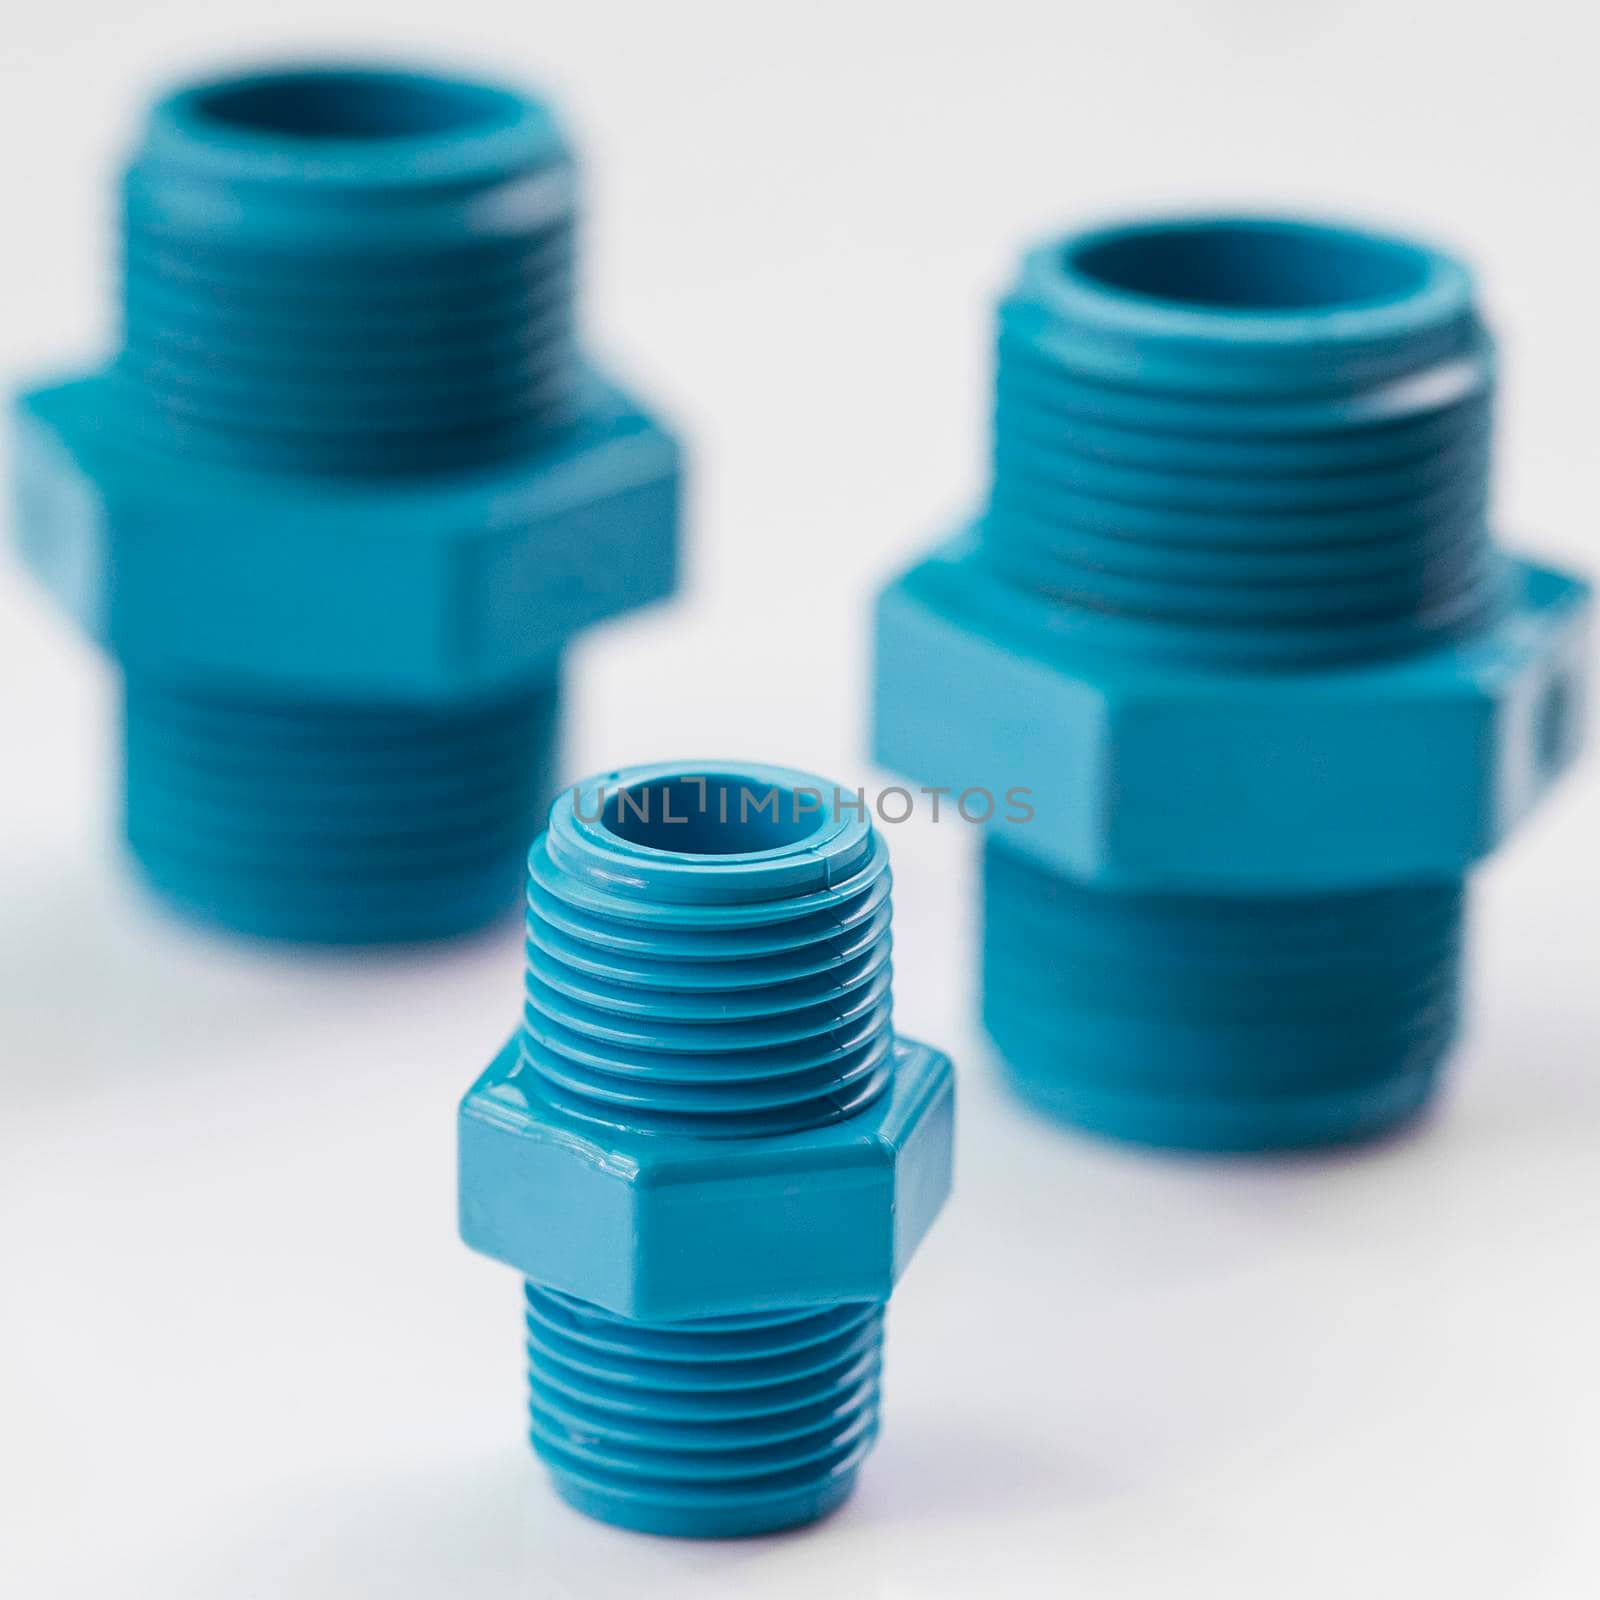 PVC pipe fittings on white background.